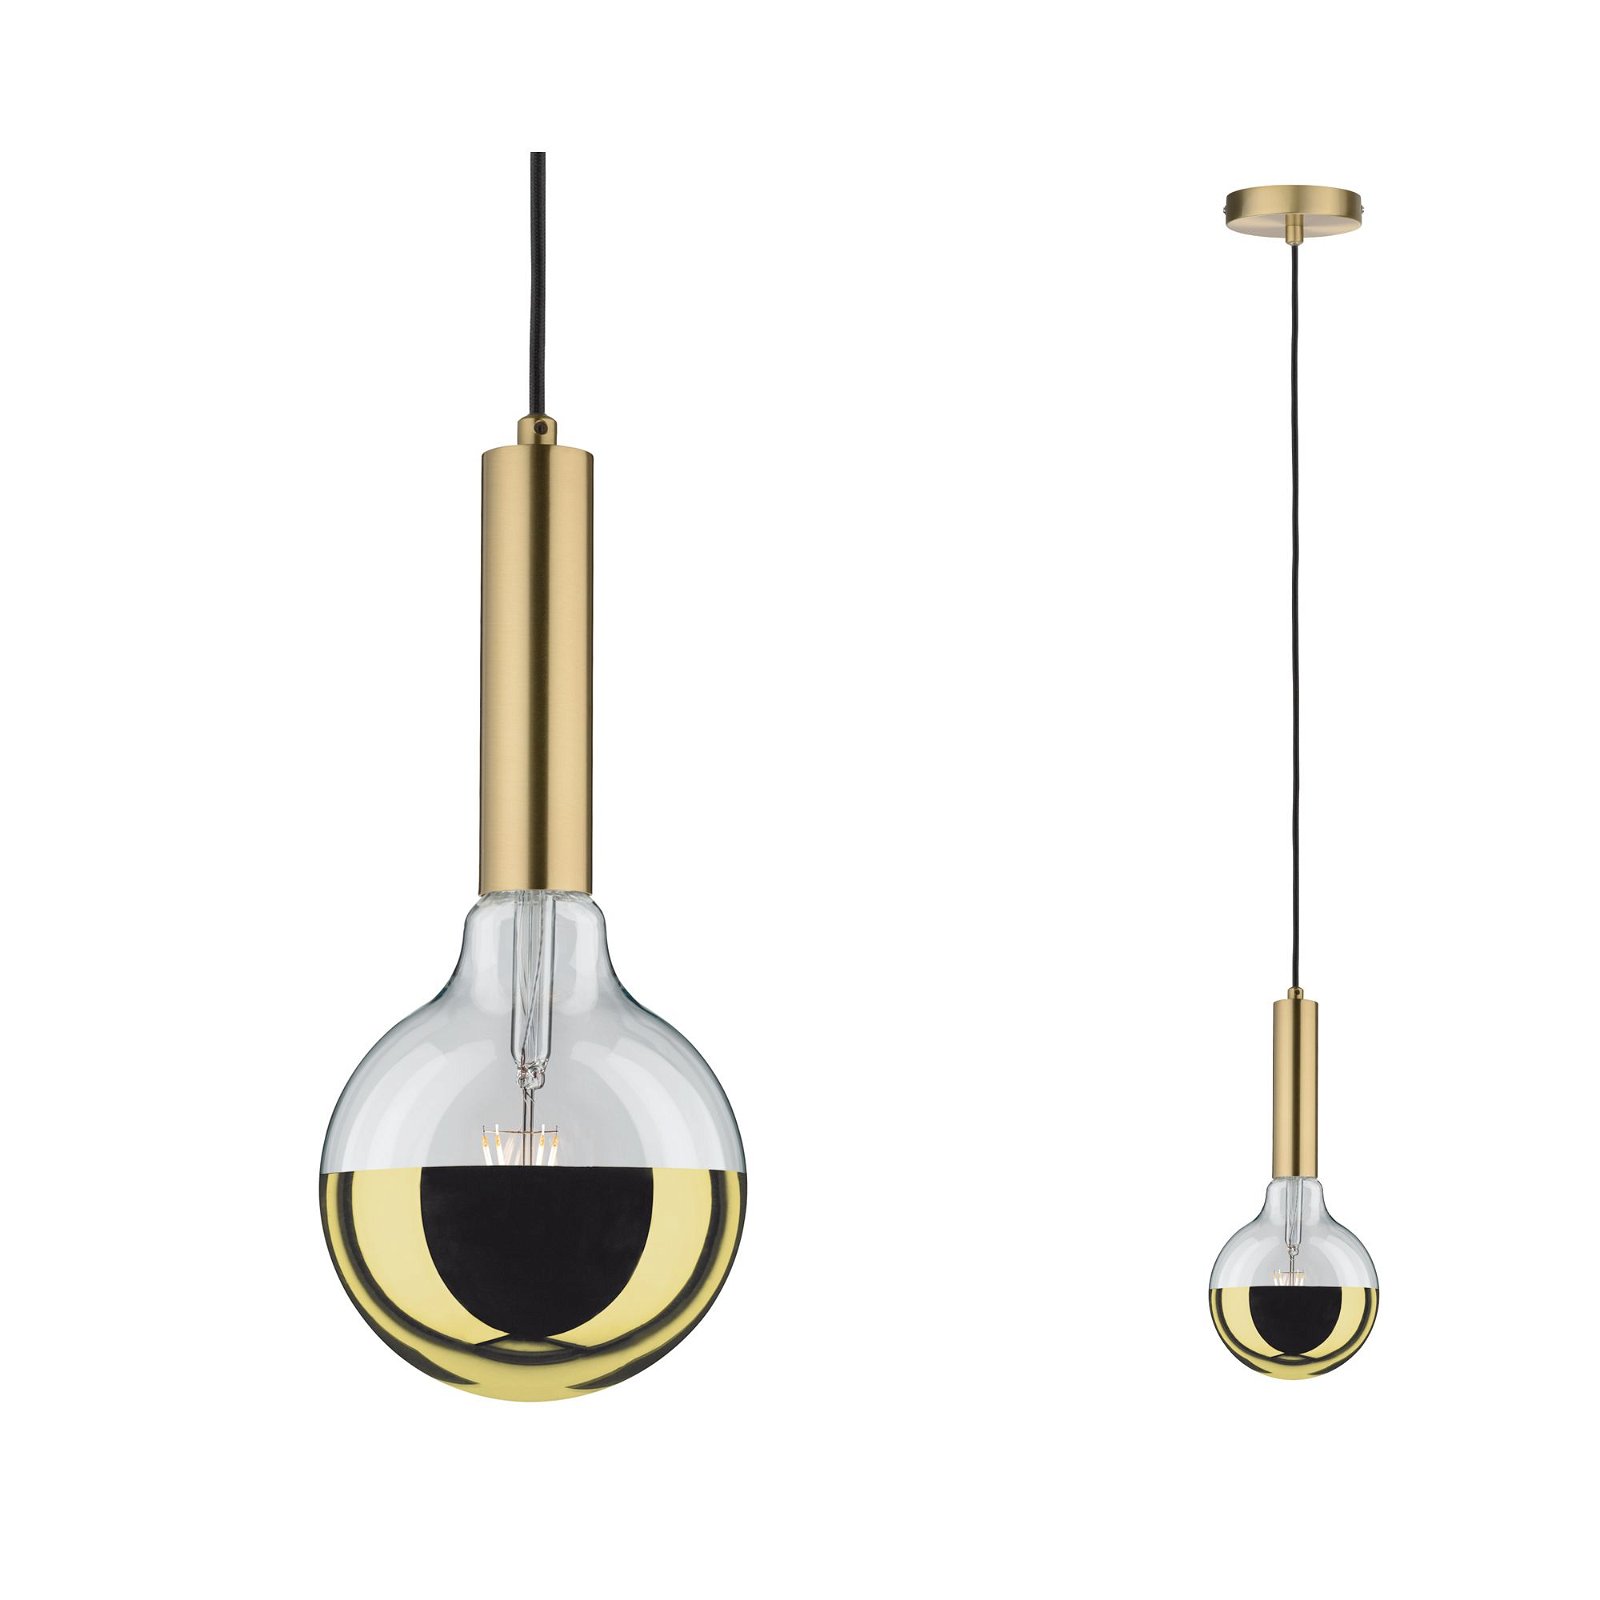 Neordic Pendant luminaire Kine E27 max. 60W Brushed brass dimmable Metal